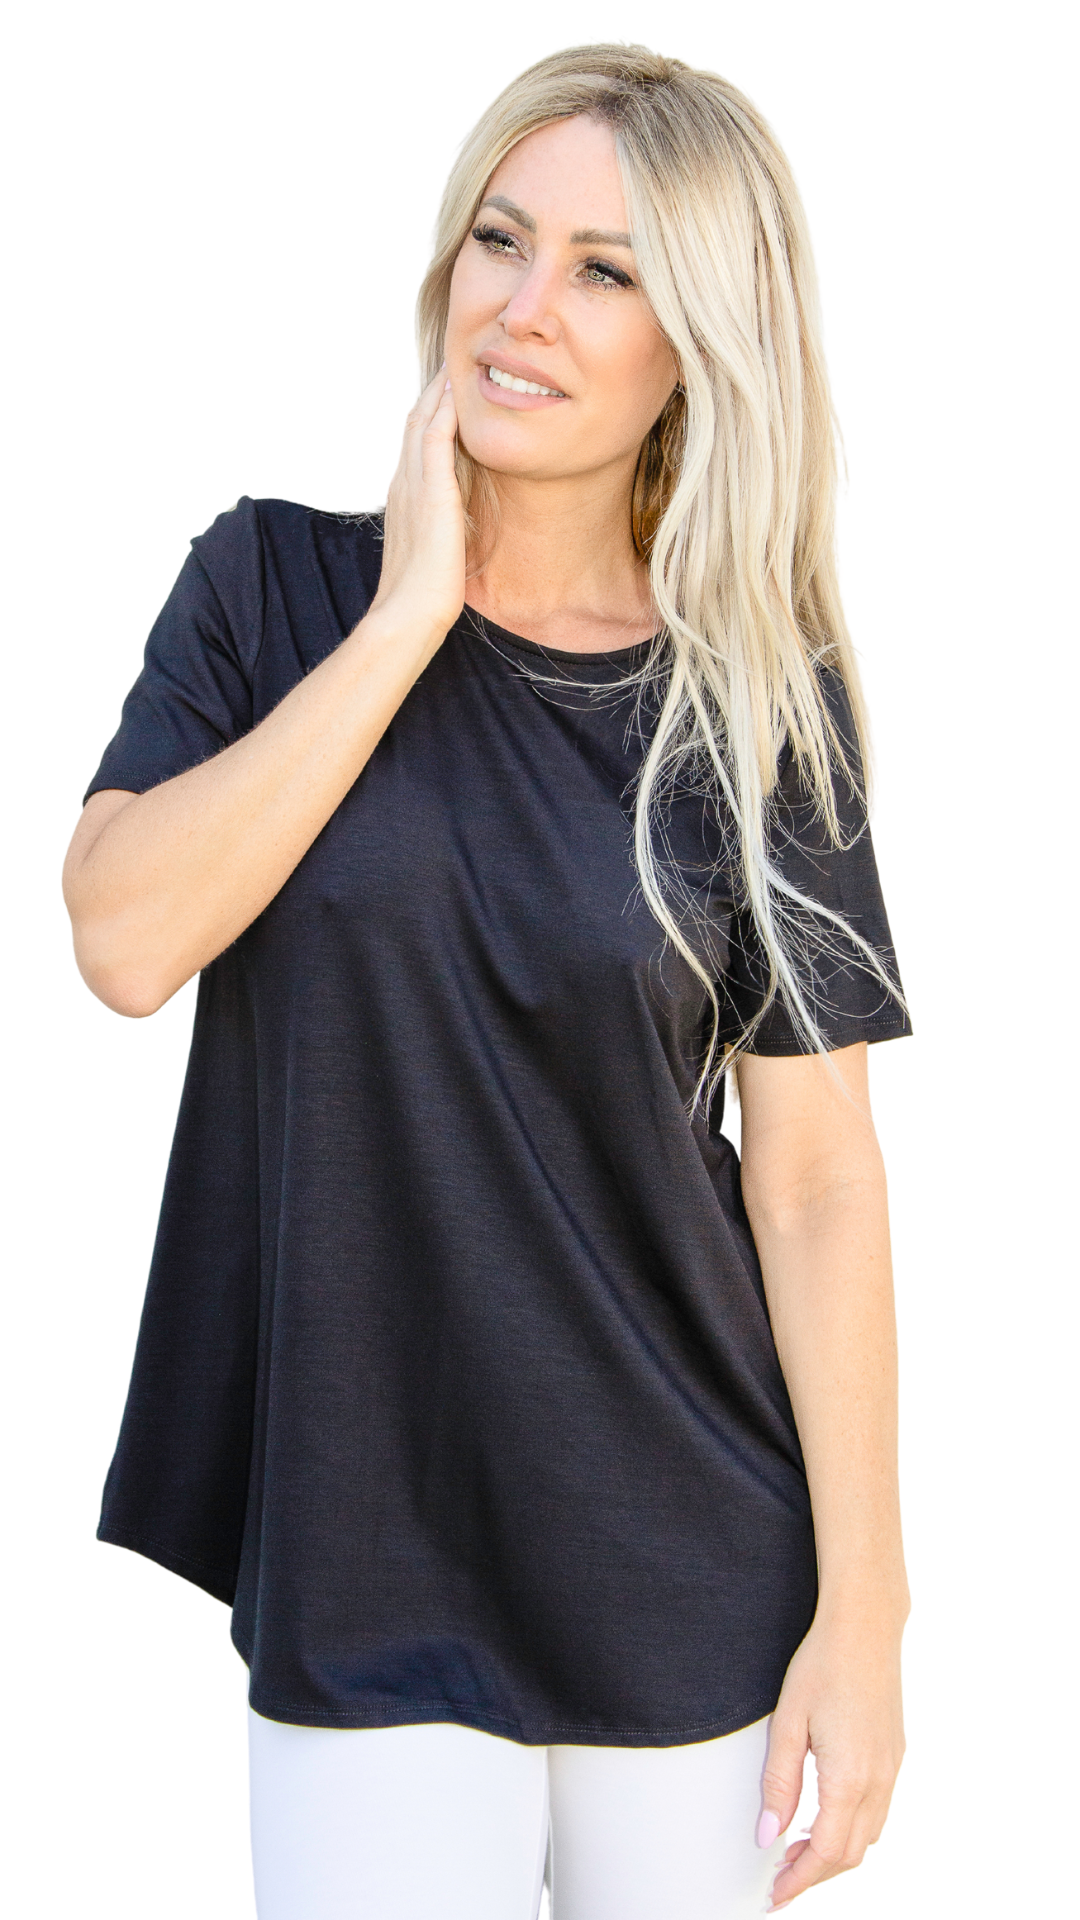 Stretch T-Shirt in Multiple Solid Colours. Style PE210-4770